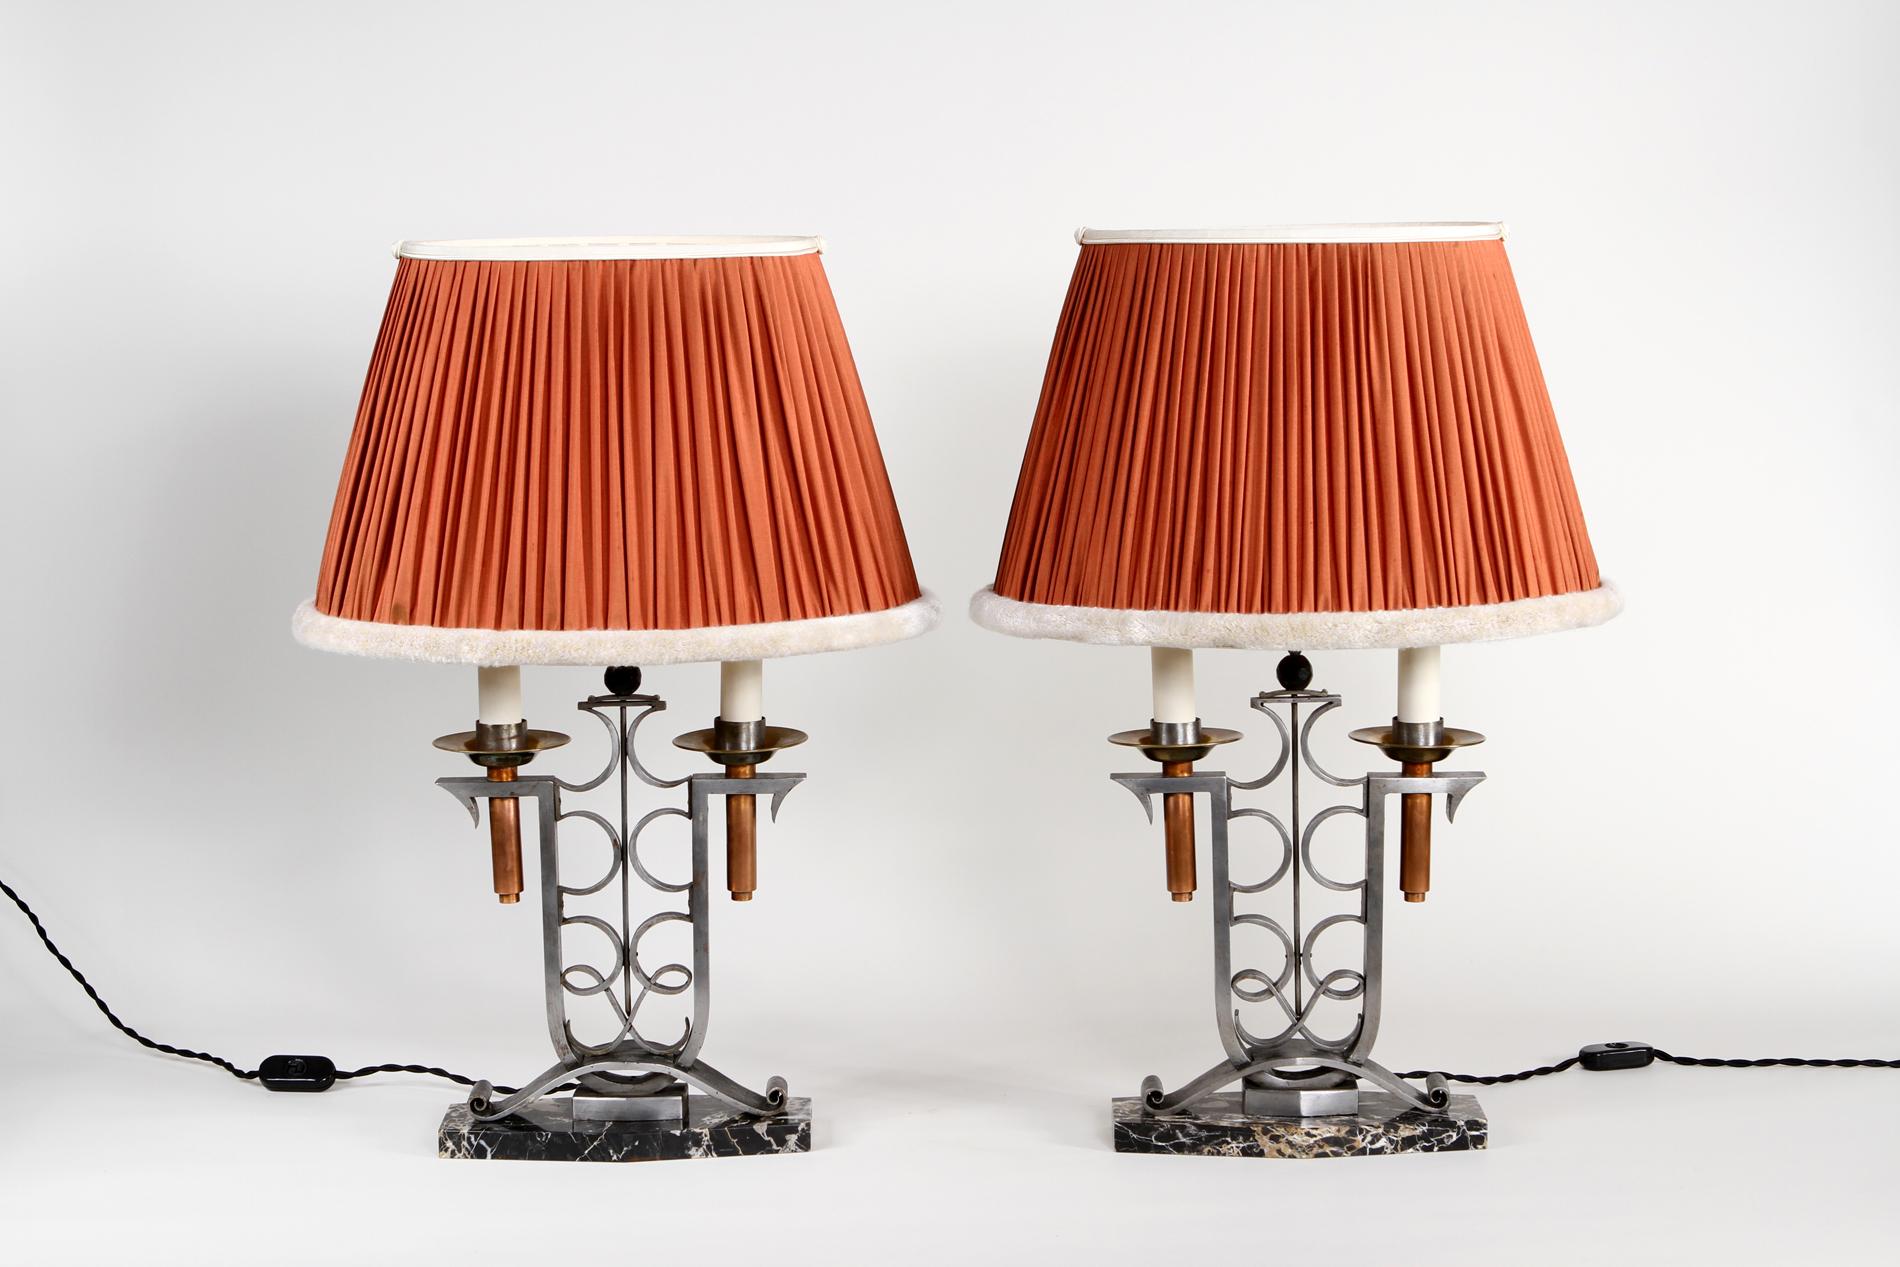 Exceptional original pair of French Art Deco by Raymond Subes circa 1930 in wrought iron and copper details and portor marble base. An elegant model with a custom made lampshade to enchanting any interior with the french art deco style.  The lamps